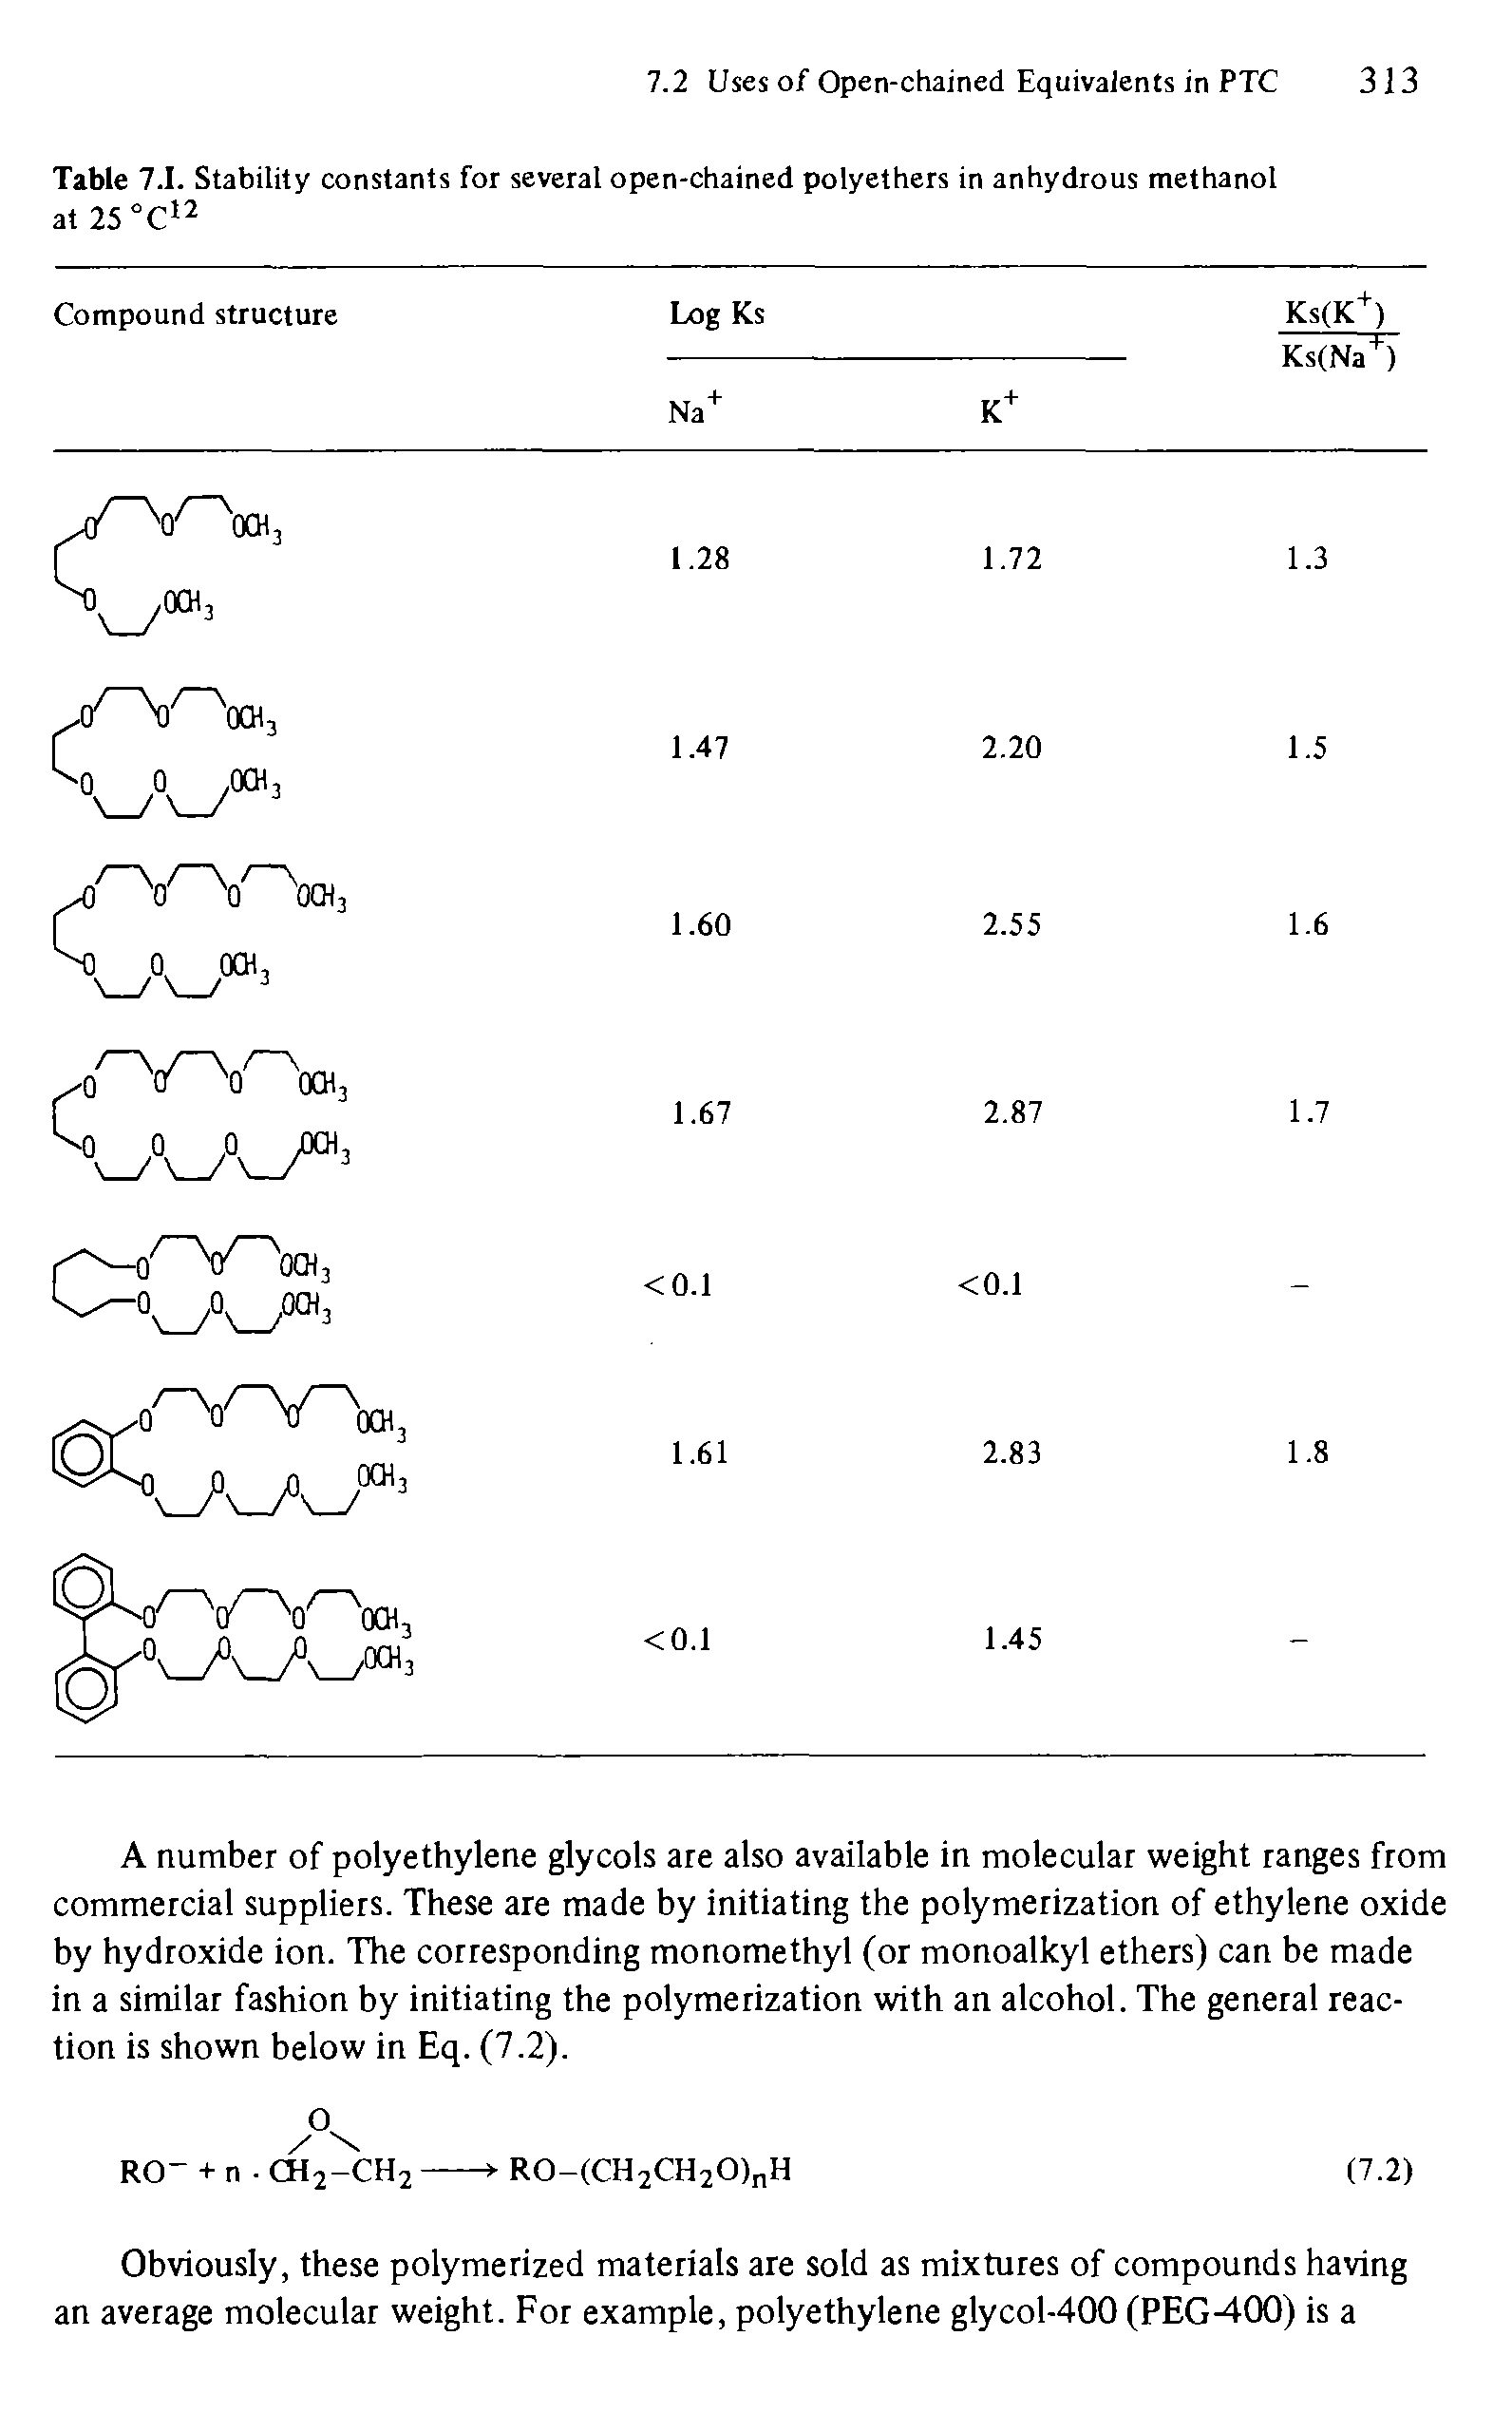 Table 7.1. Stability constants for several open-chained polyethers in anhydrous methanol at 25...